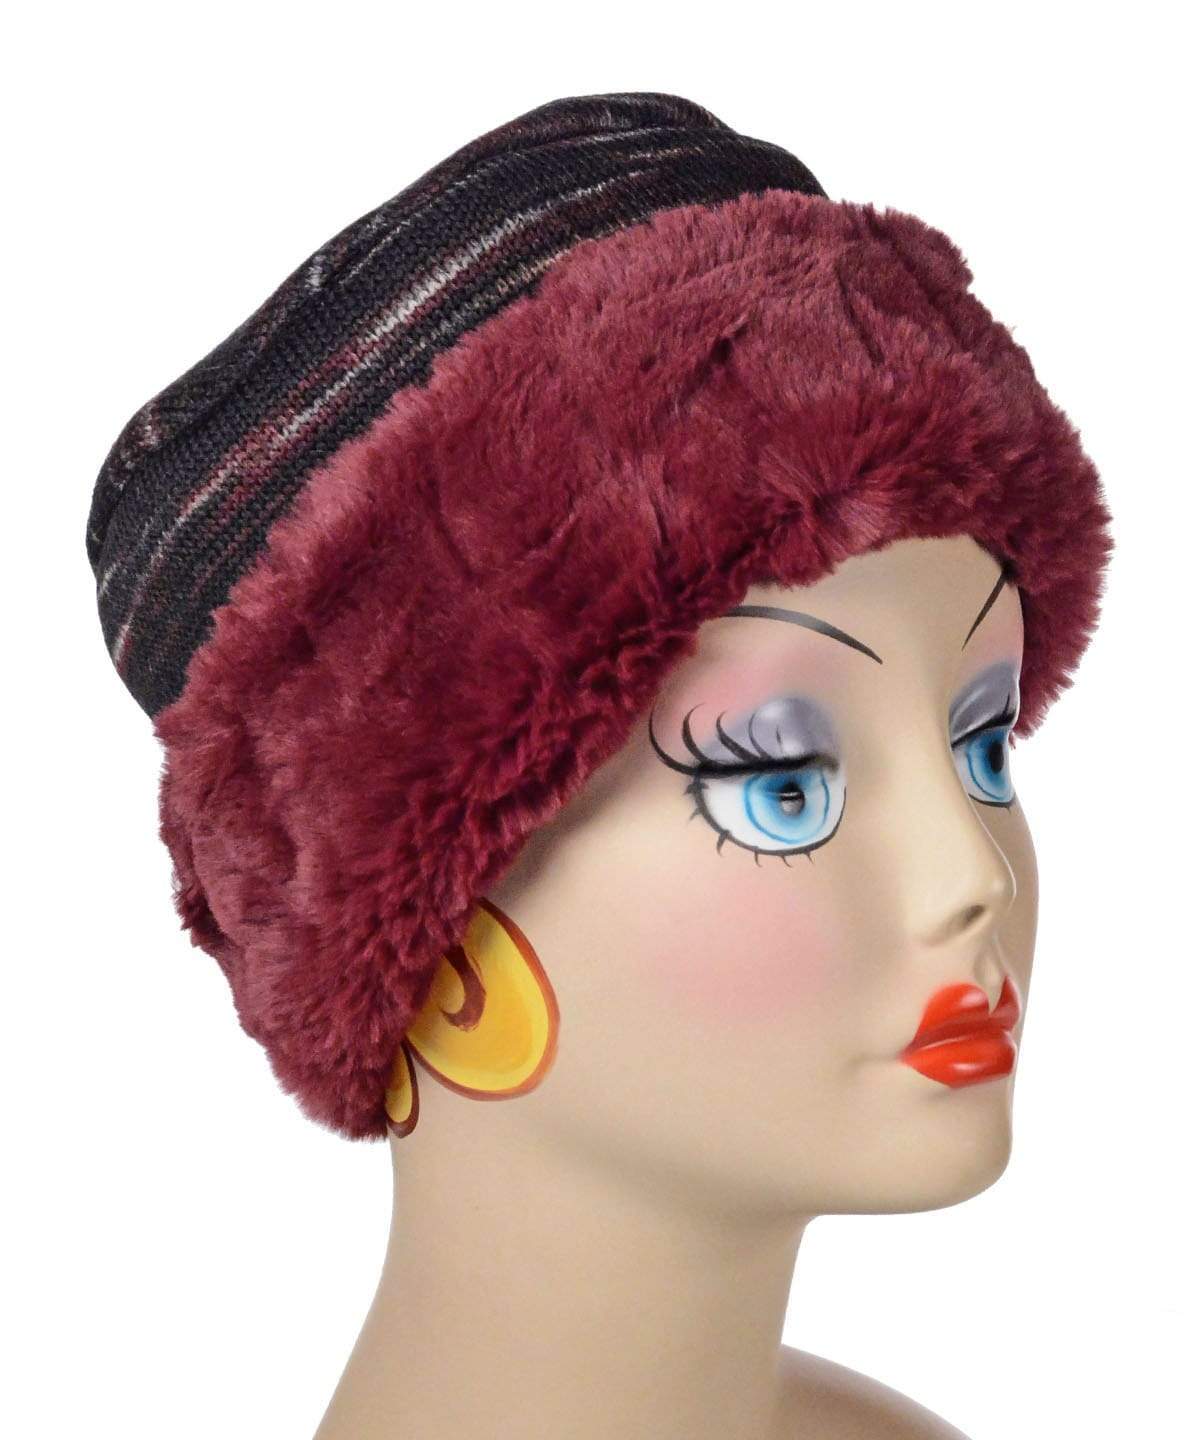 Cuffed Pillbox, Reversible (Two-Tone) - Sweet Stripes in Cherry Cordial with Assorted Faux Fur (Cranberry Creek Lining - Limited Availability)